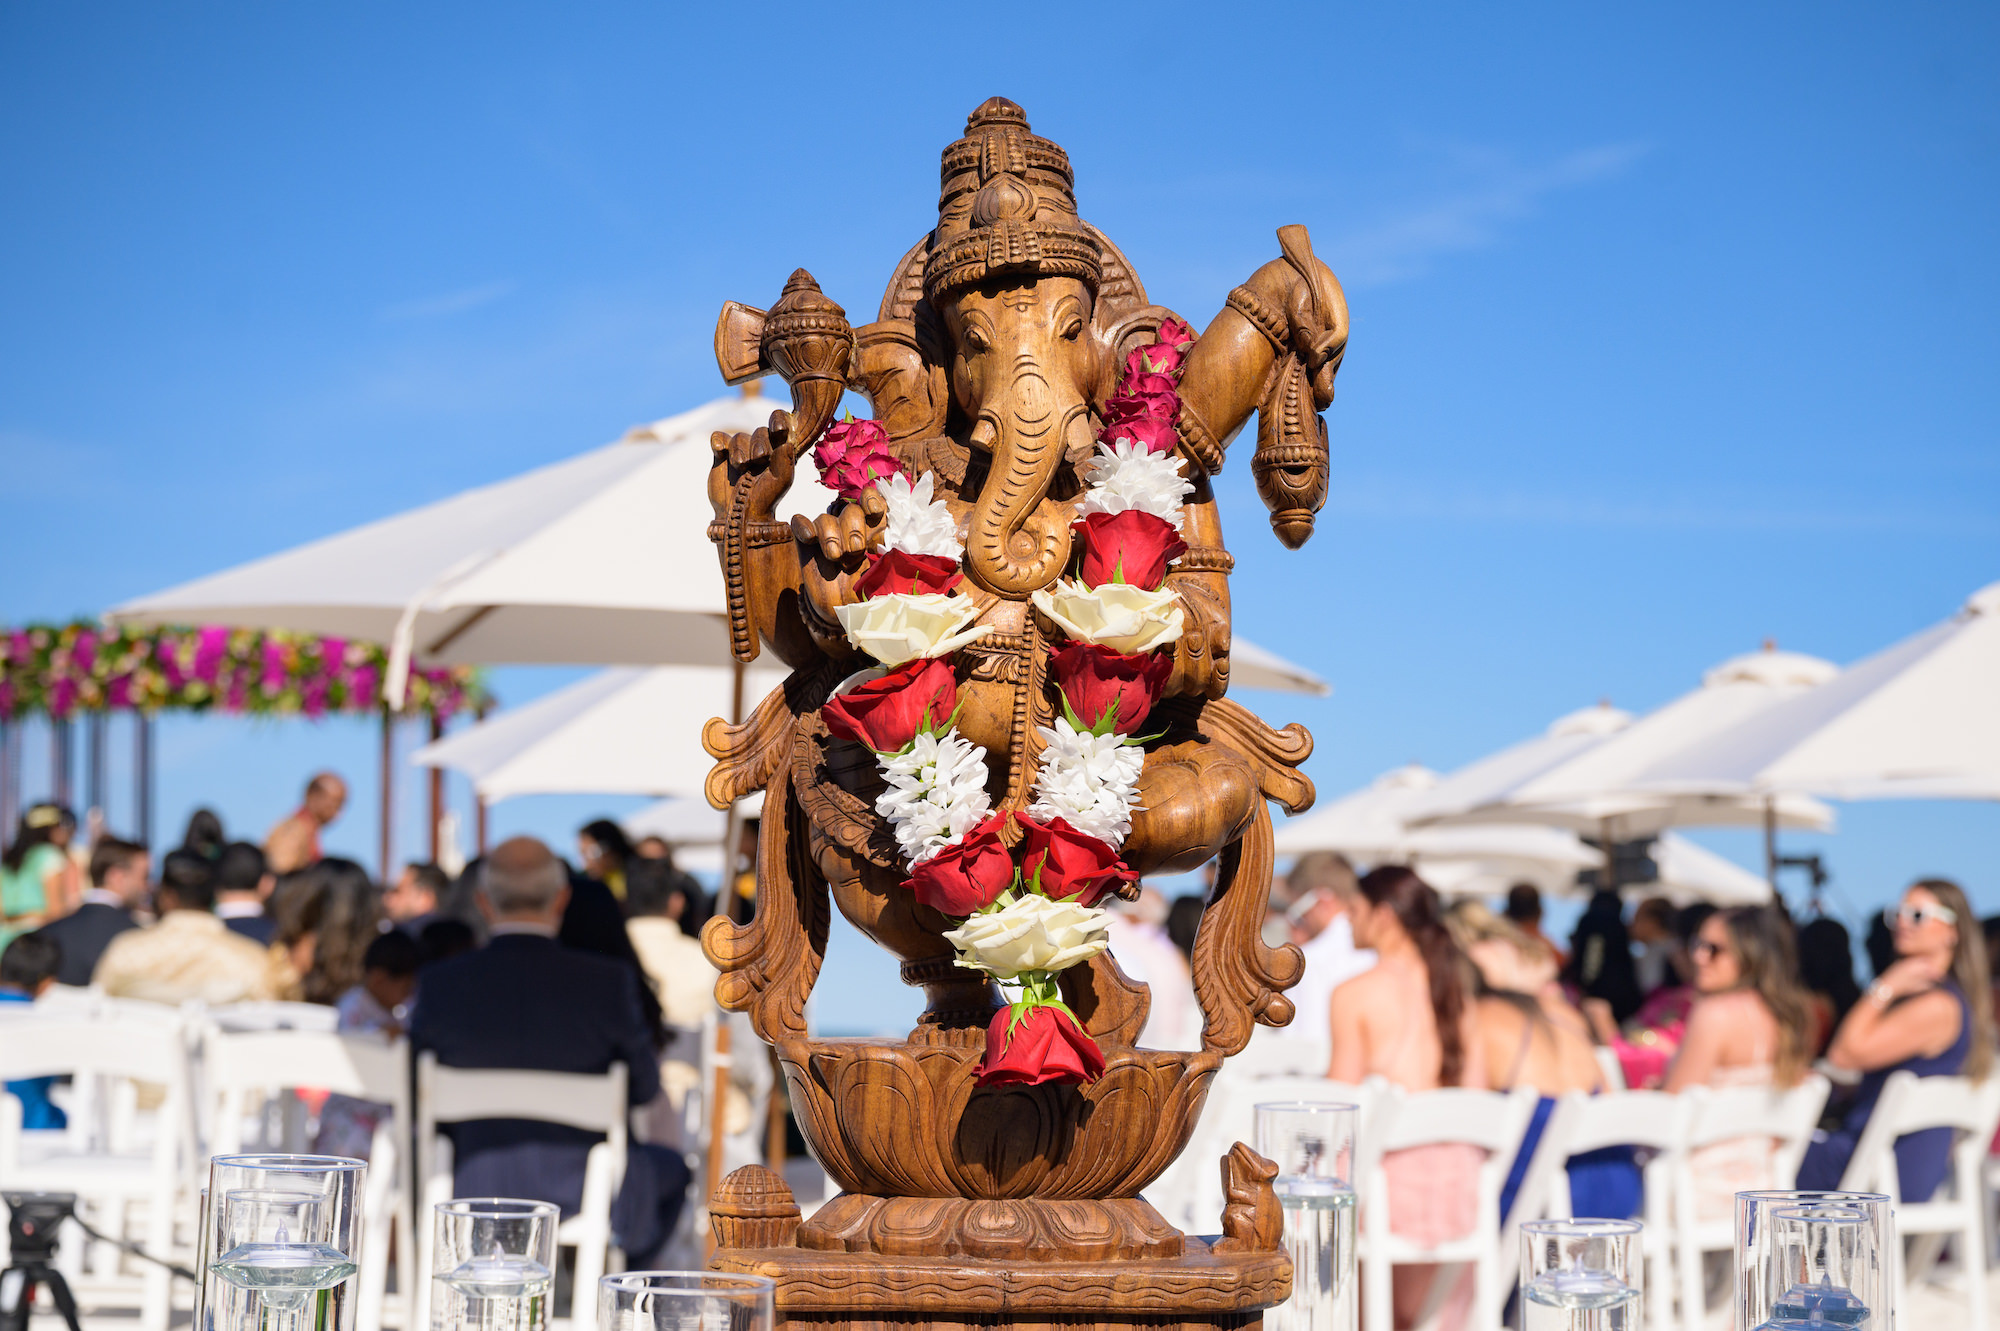 Hindu Wedding Ceremony Decor, Ganesha Elephant Statue Decorated with Red, White and Pink Floral Garland